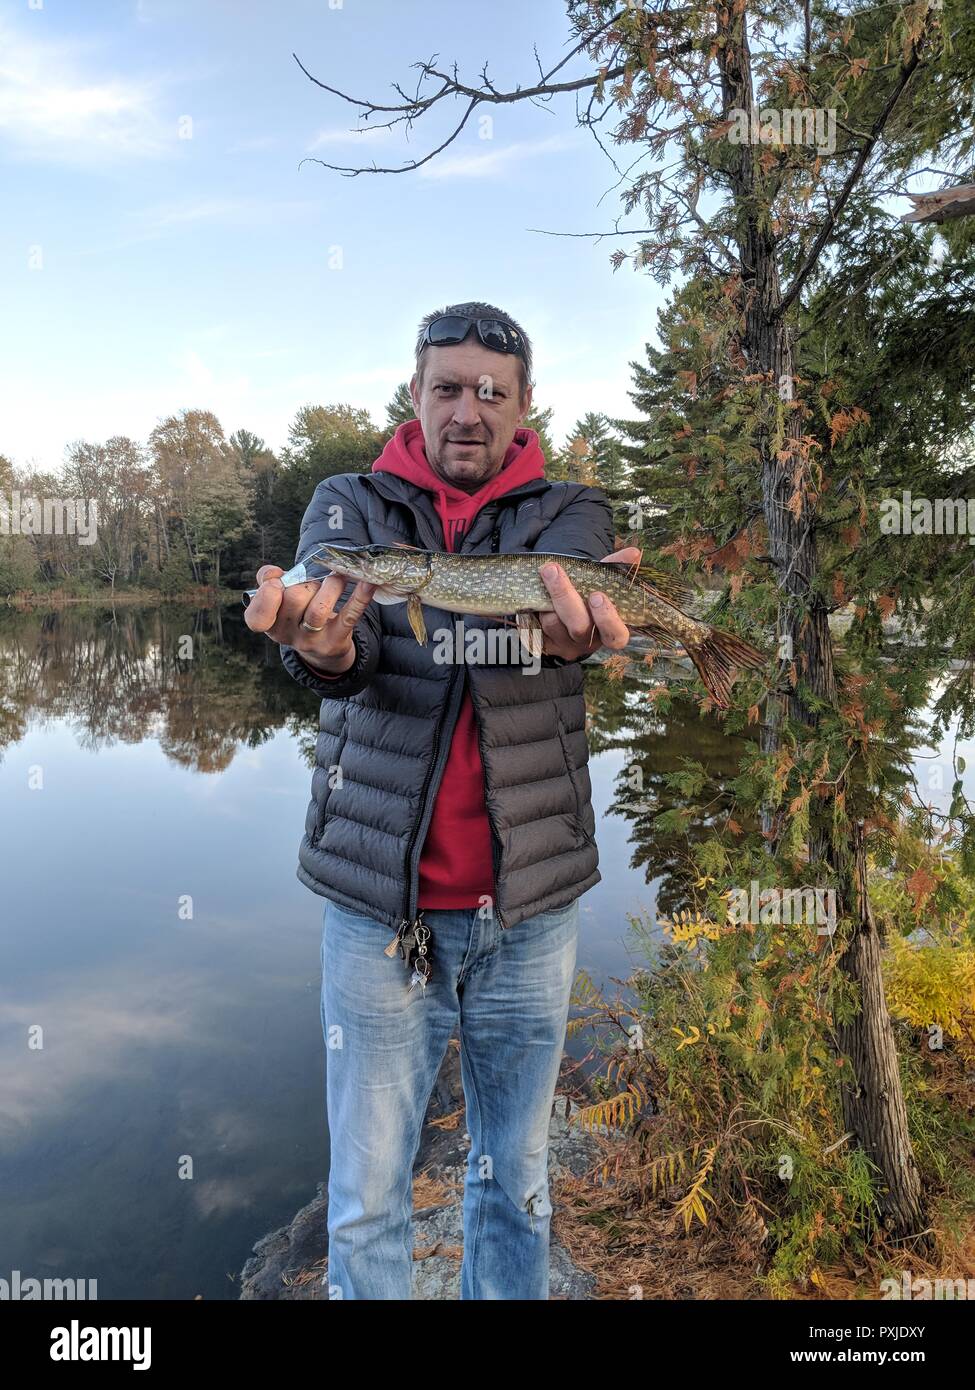 A man, Fish in the Hands, Real People, Lifestyle, Fishing, Outdoor Stockfoto